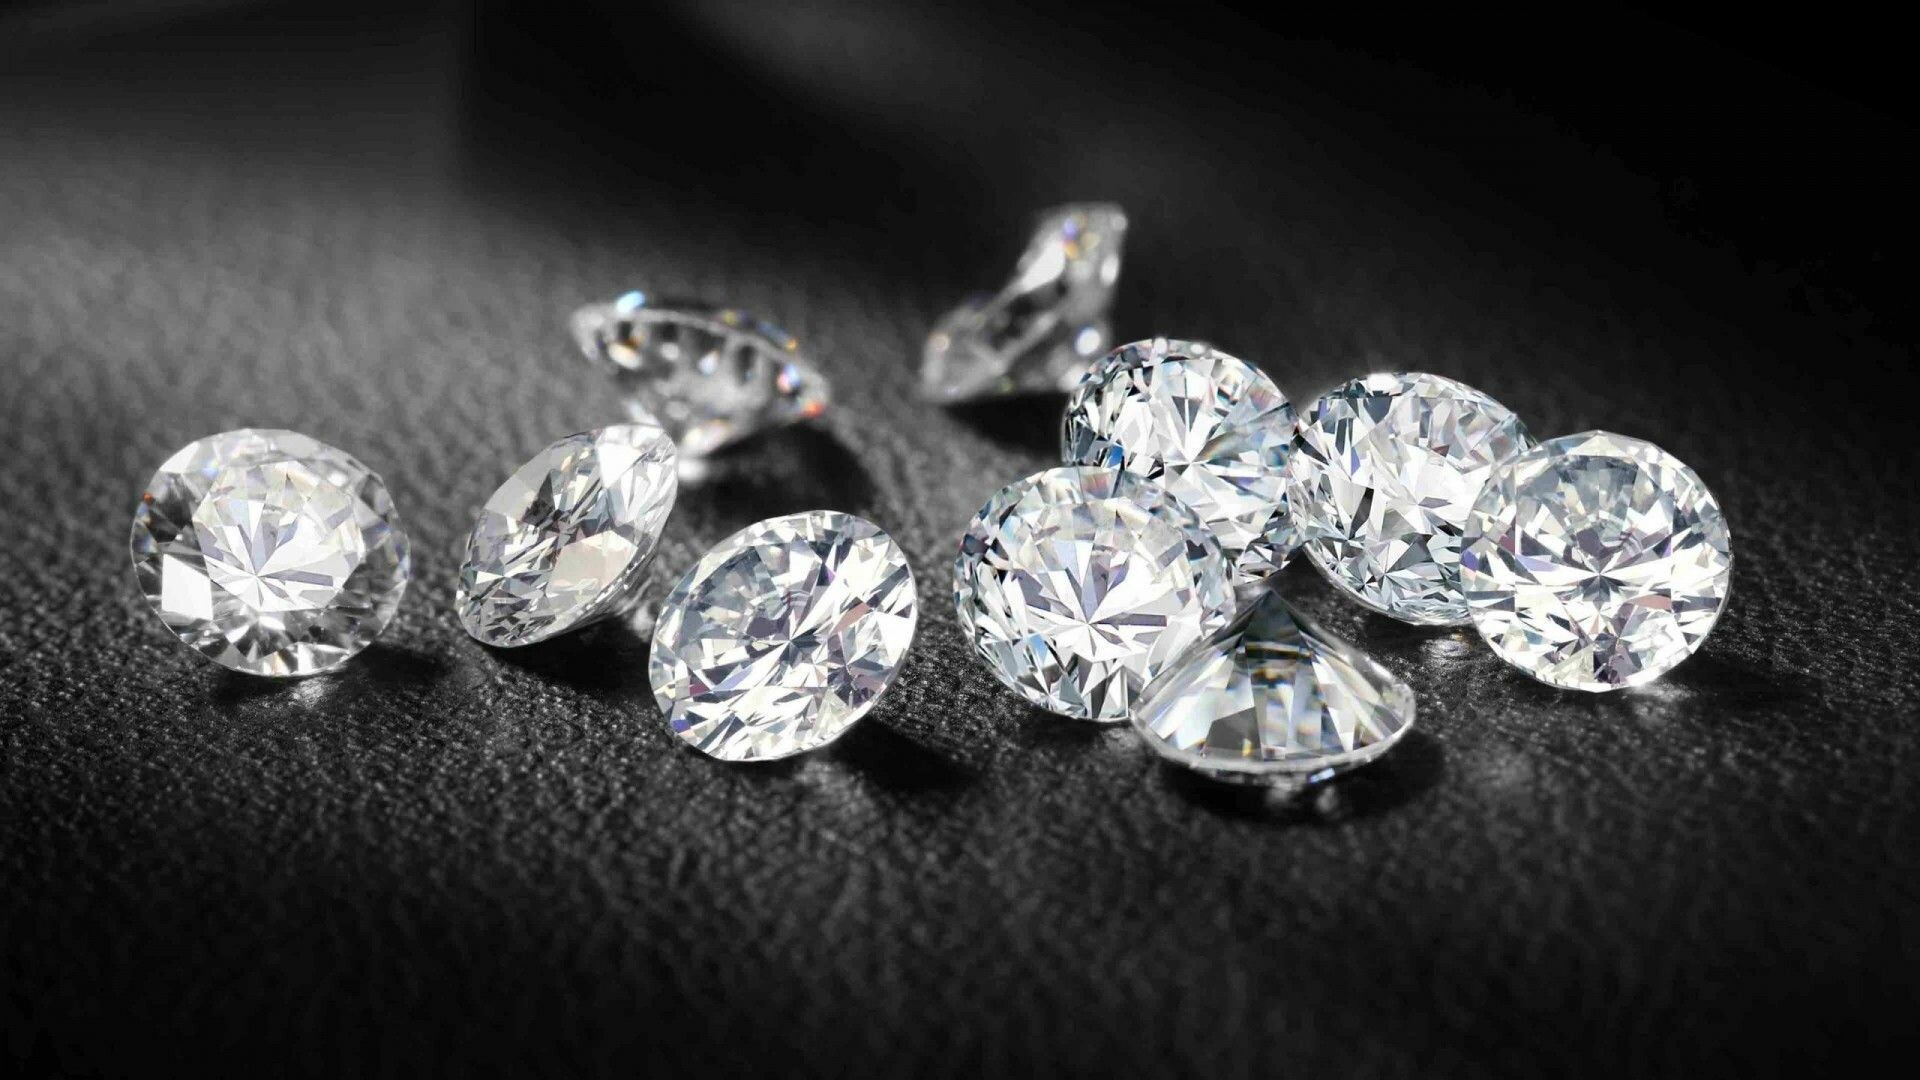 Jewels: Diamond, The crystallized form of pure carbon. 1920x1080 Full HD Wallpaper.